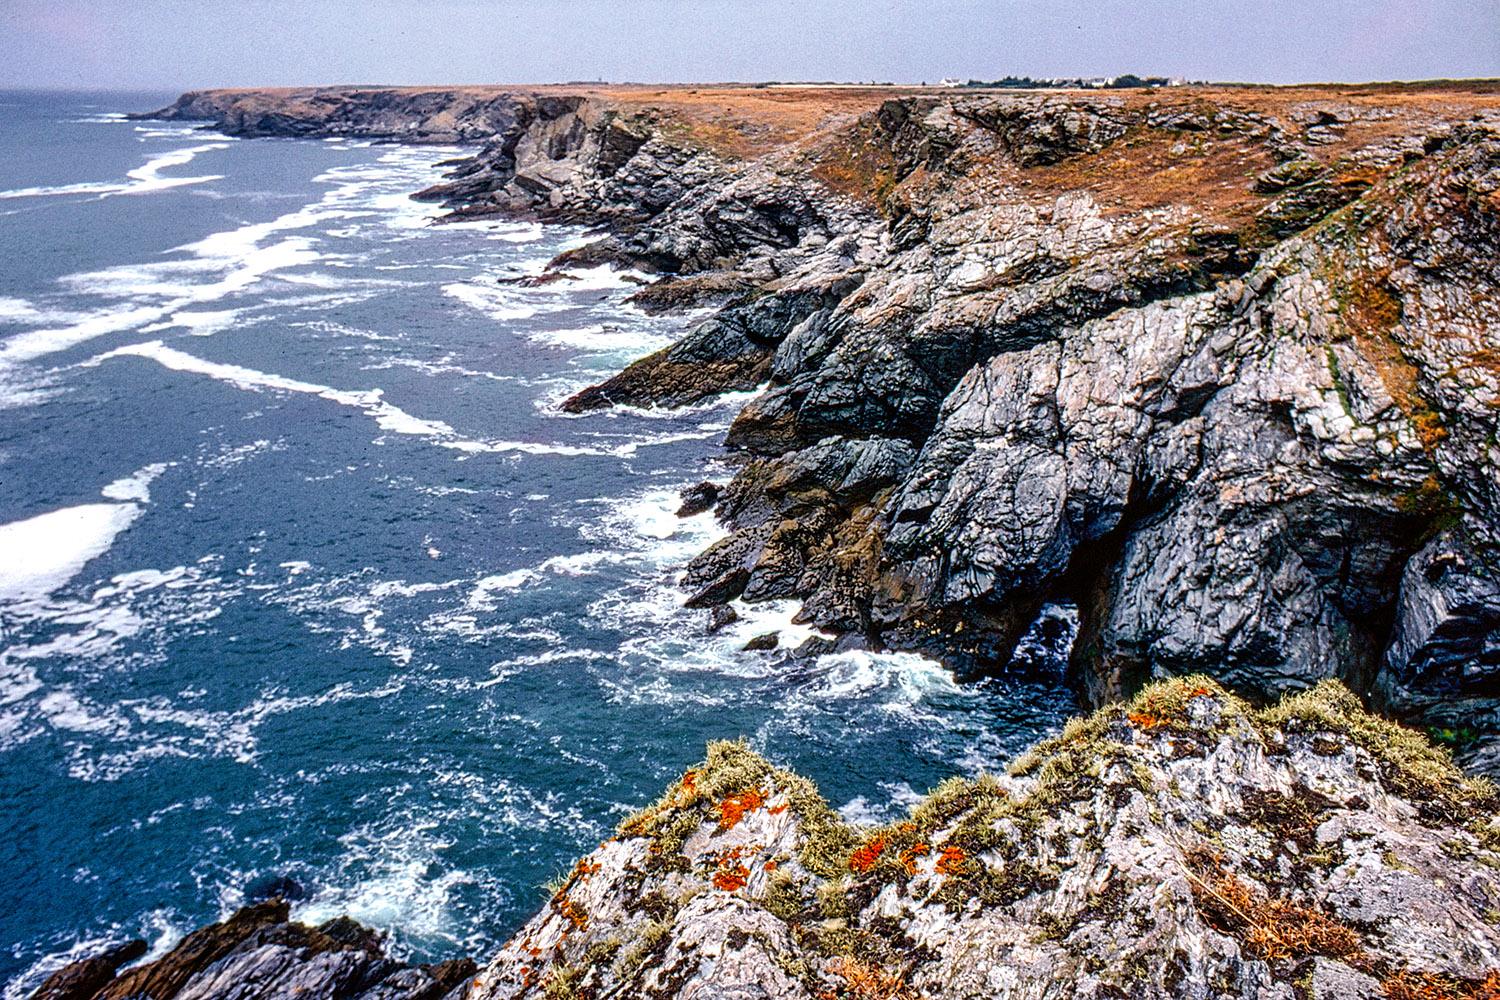 The relentless Atlantic Ocean pounds the island's southern coast